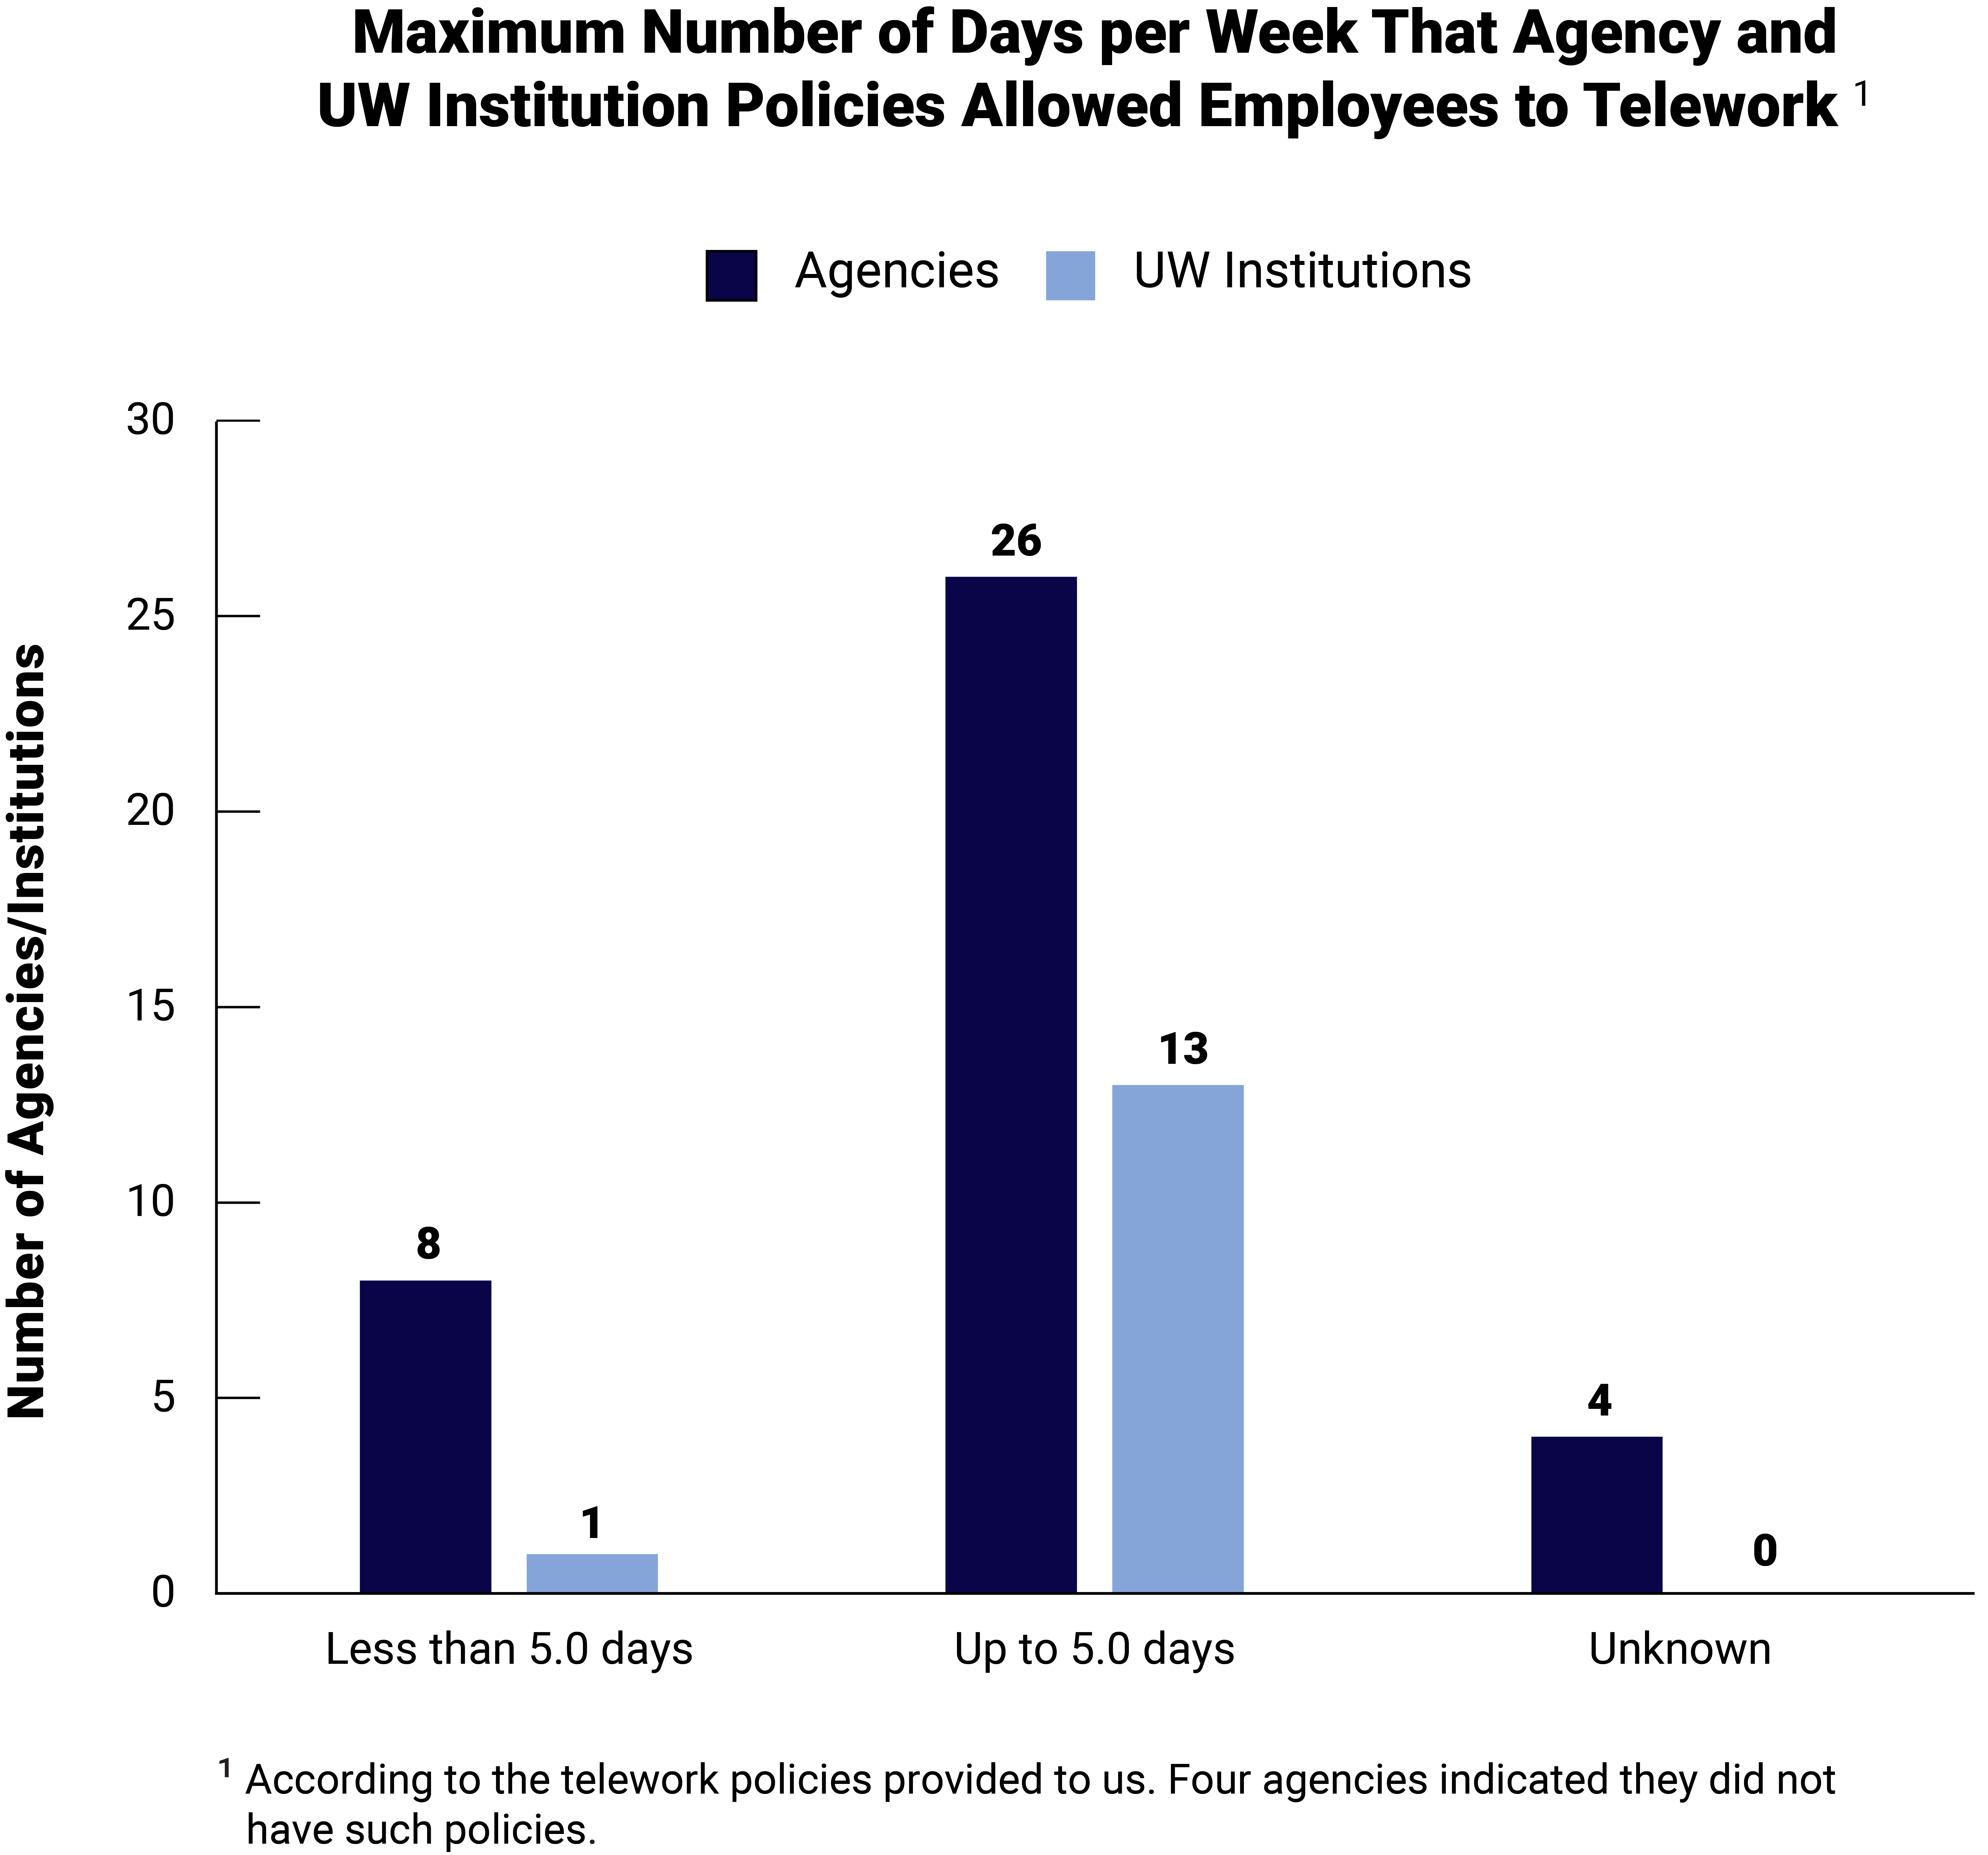 A bar graph showing the maximum days per week that agency and UW policies allowed employees to telework.